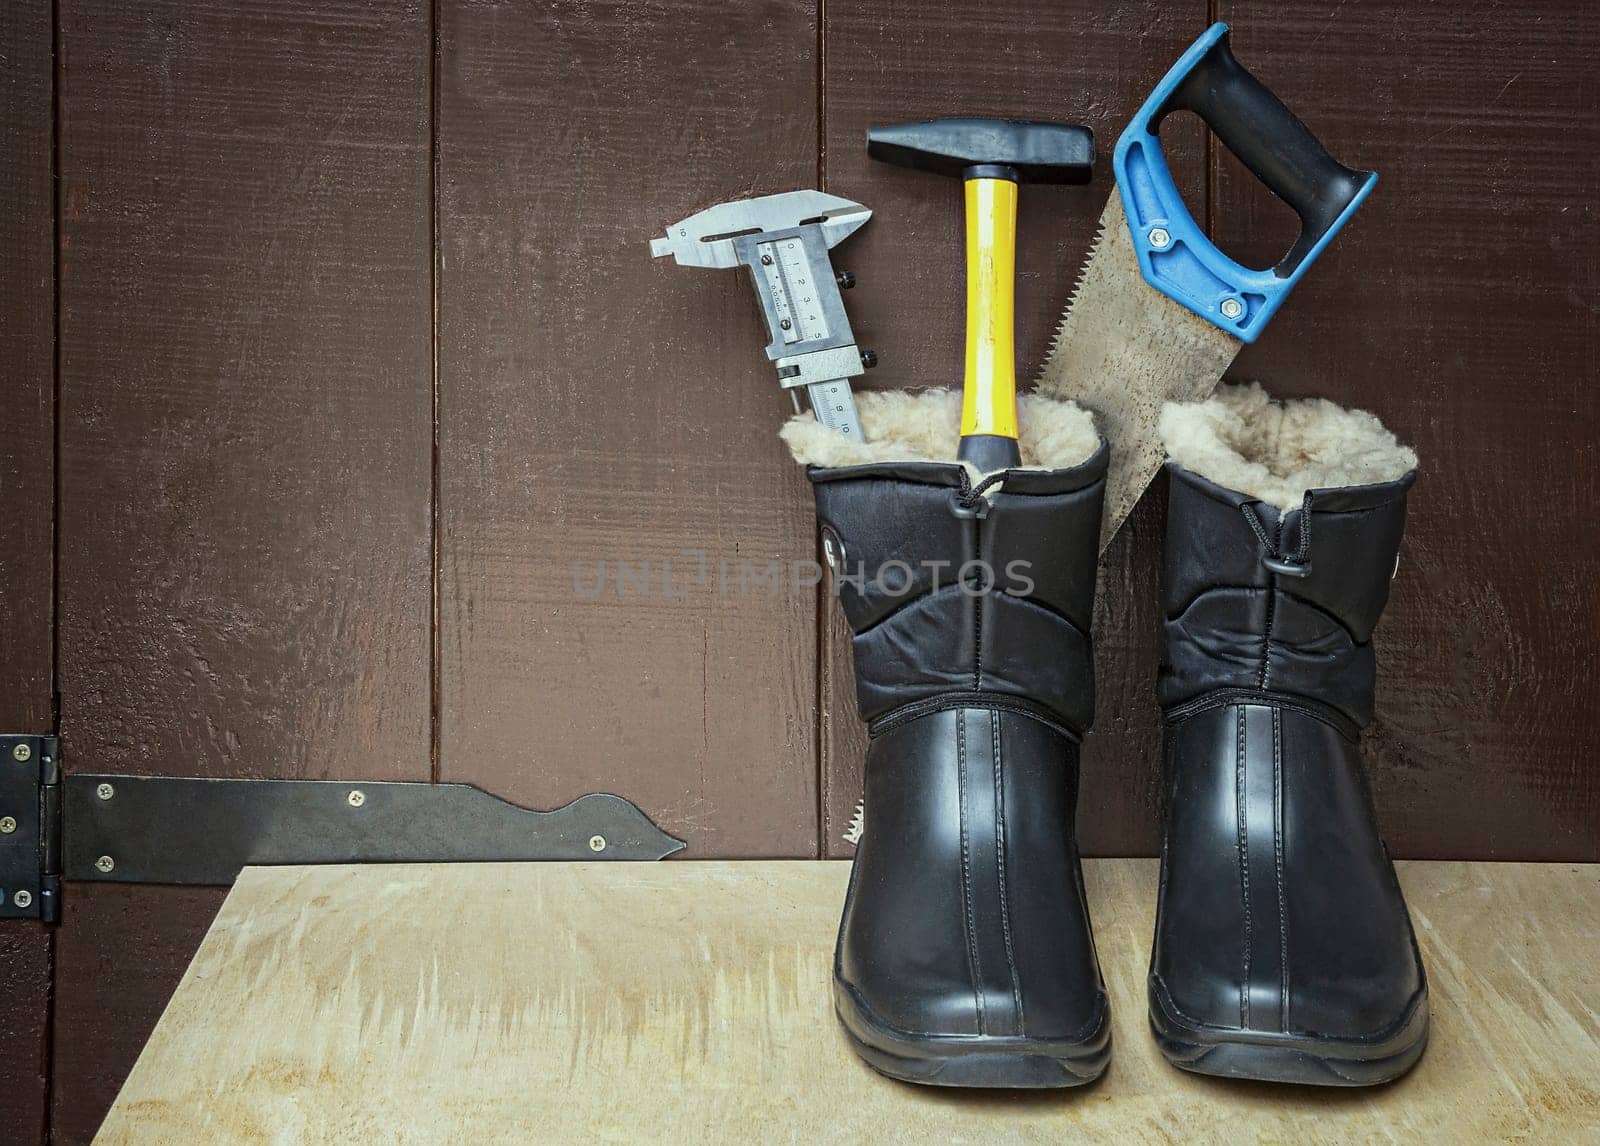 Work boots and tools. by georgina198